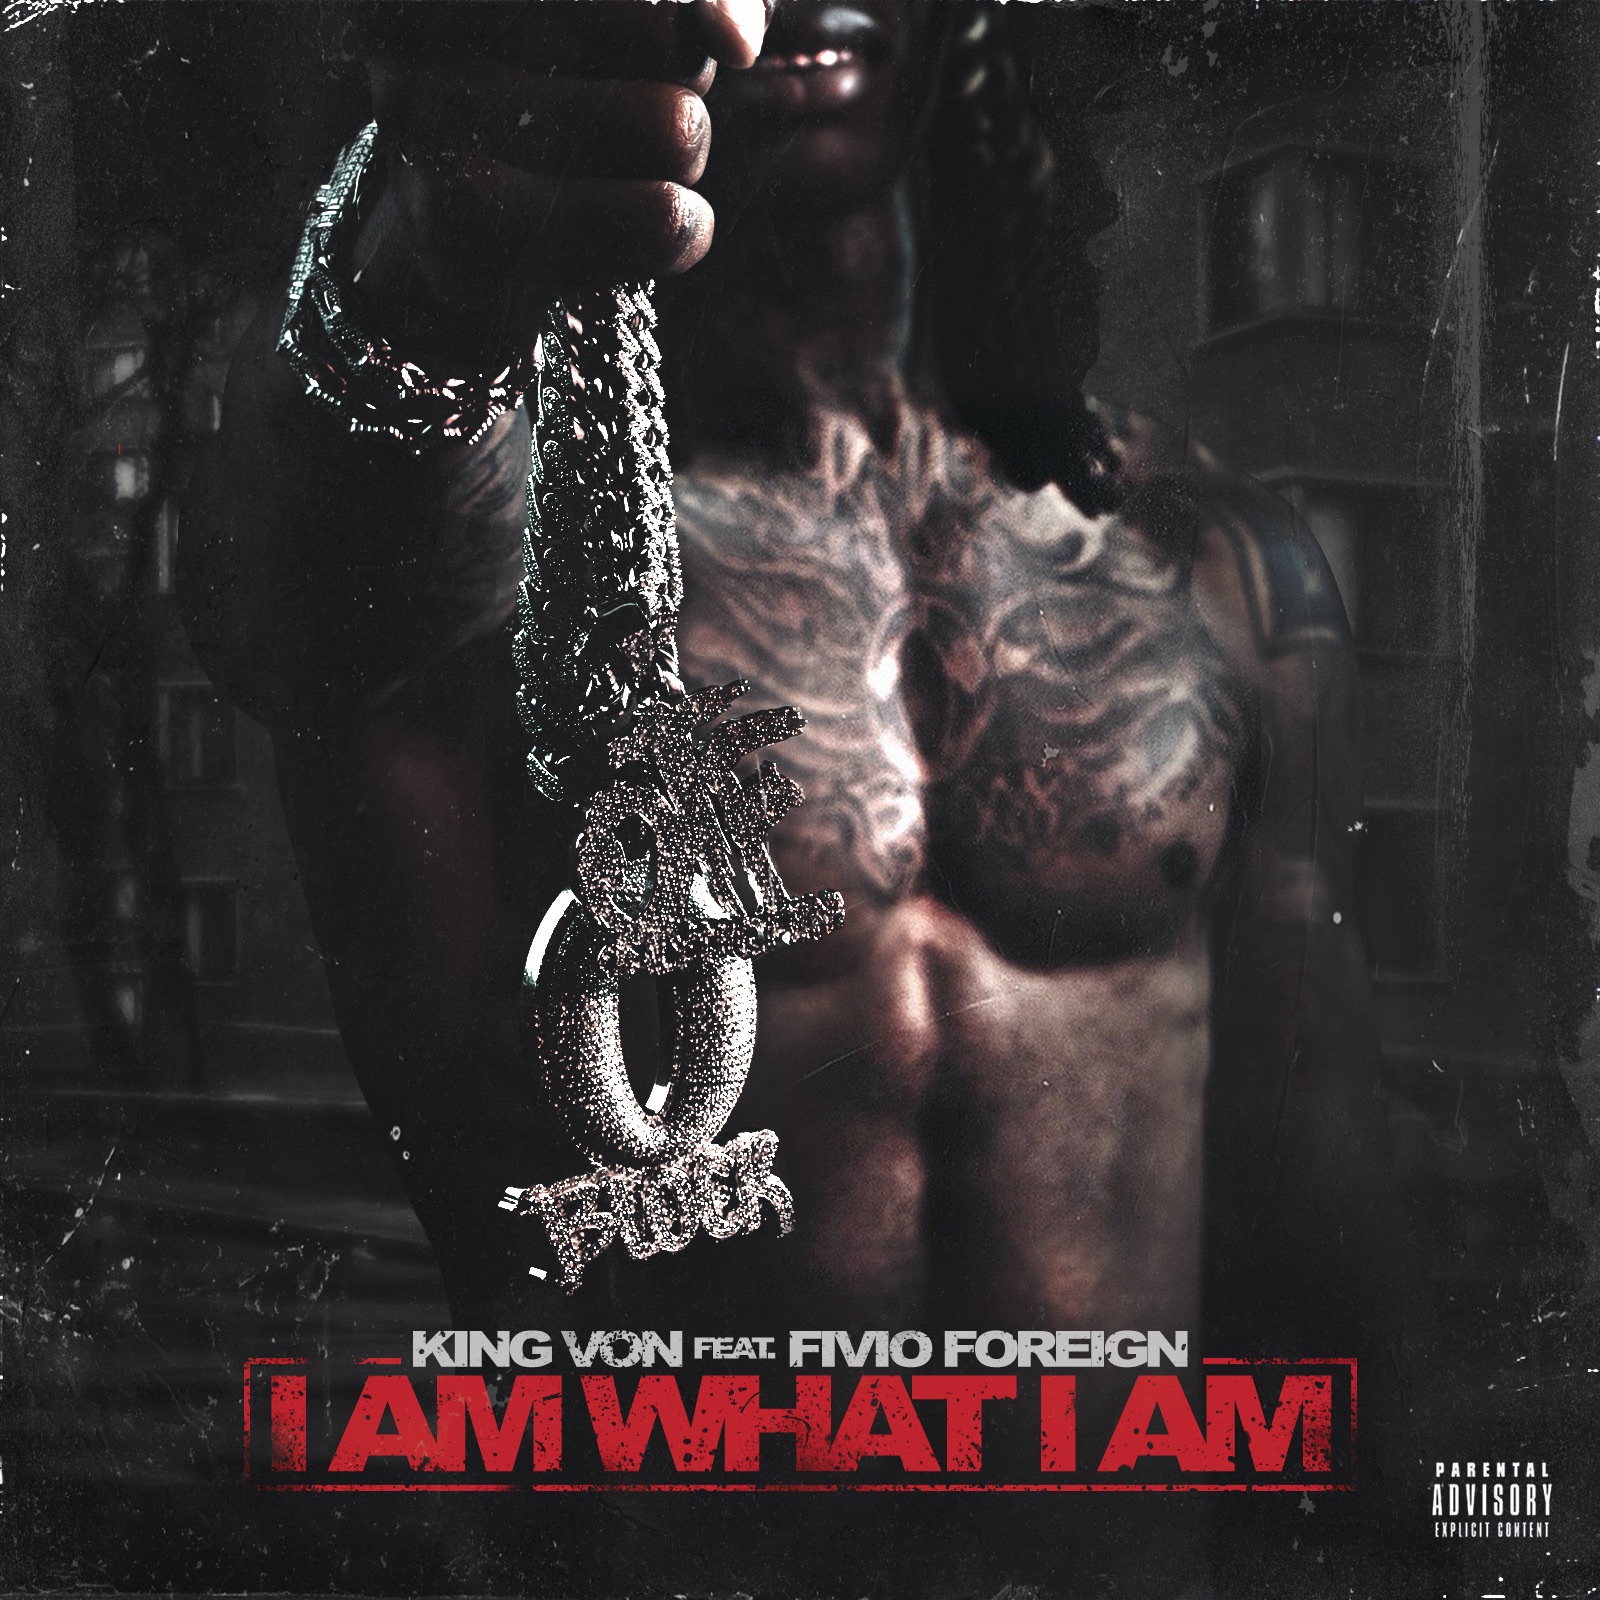 King Von - I Am What I Am (feat. Fivio Foreign) - Single